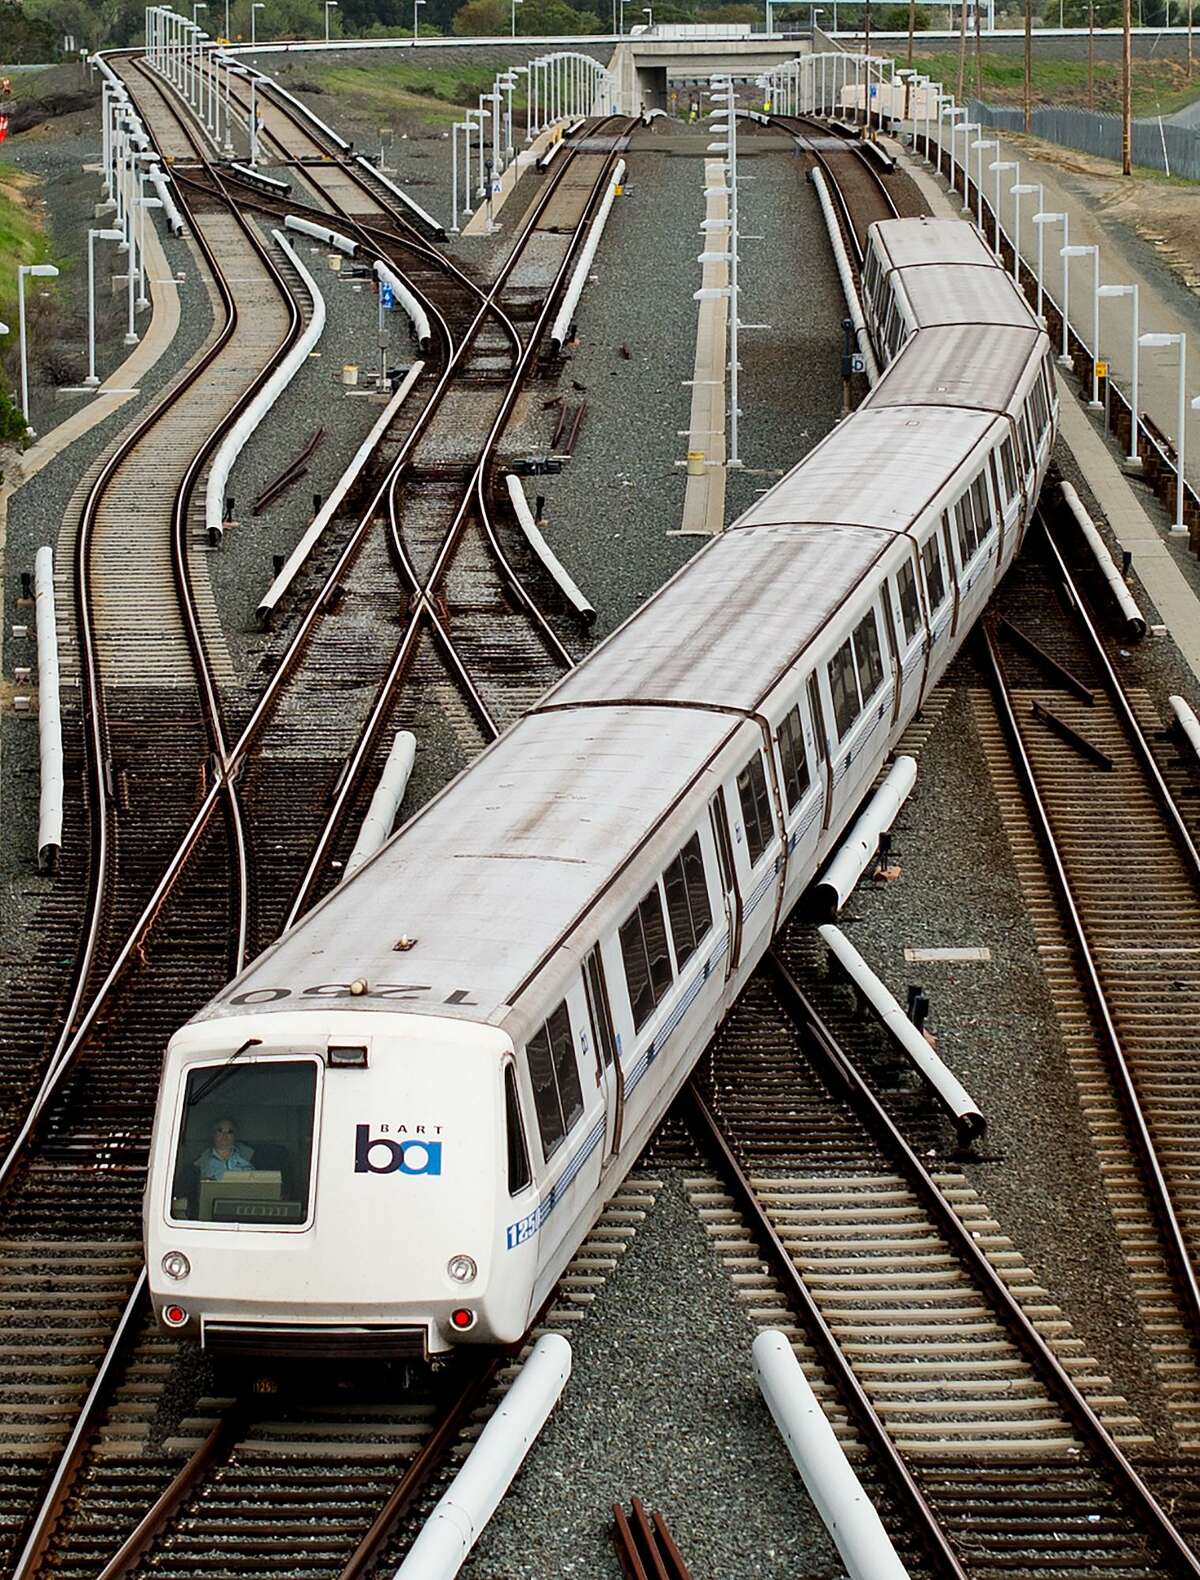 A teenager was arrested on suspicion of 19 break-ins of cars in BART parking lots on the Peninsula, according to the transit agency.